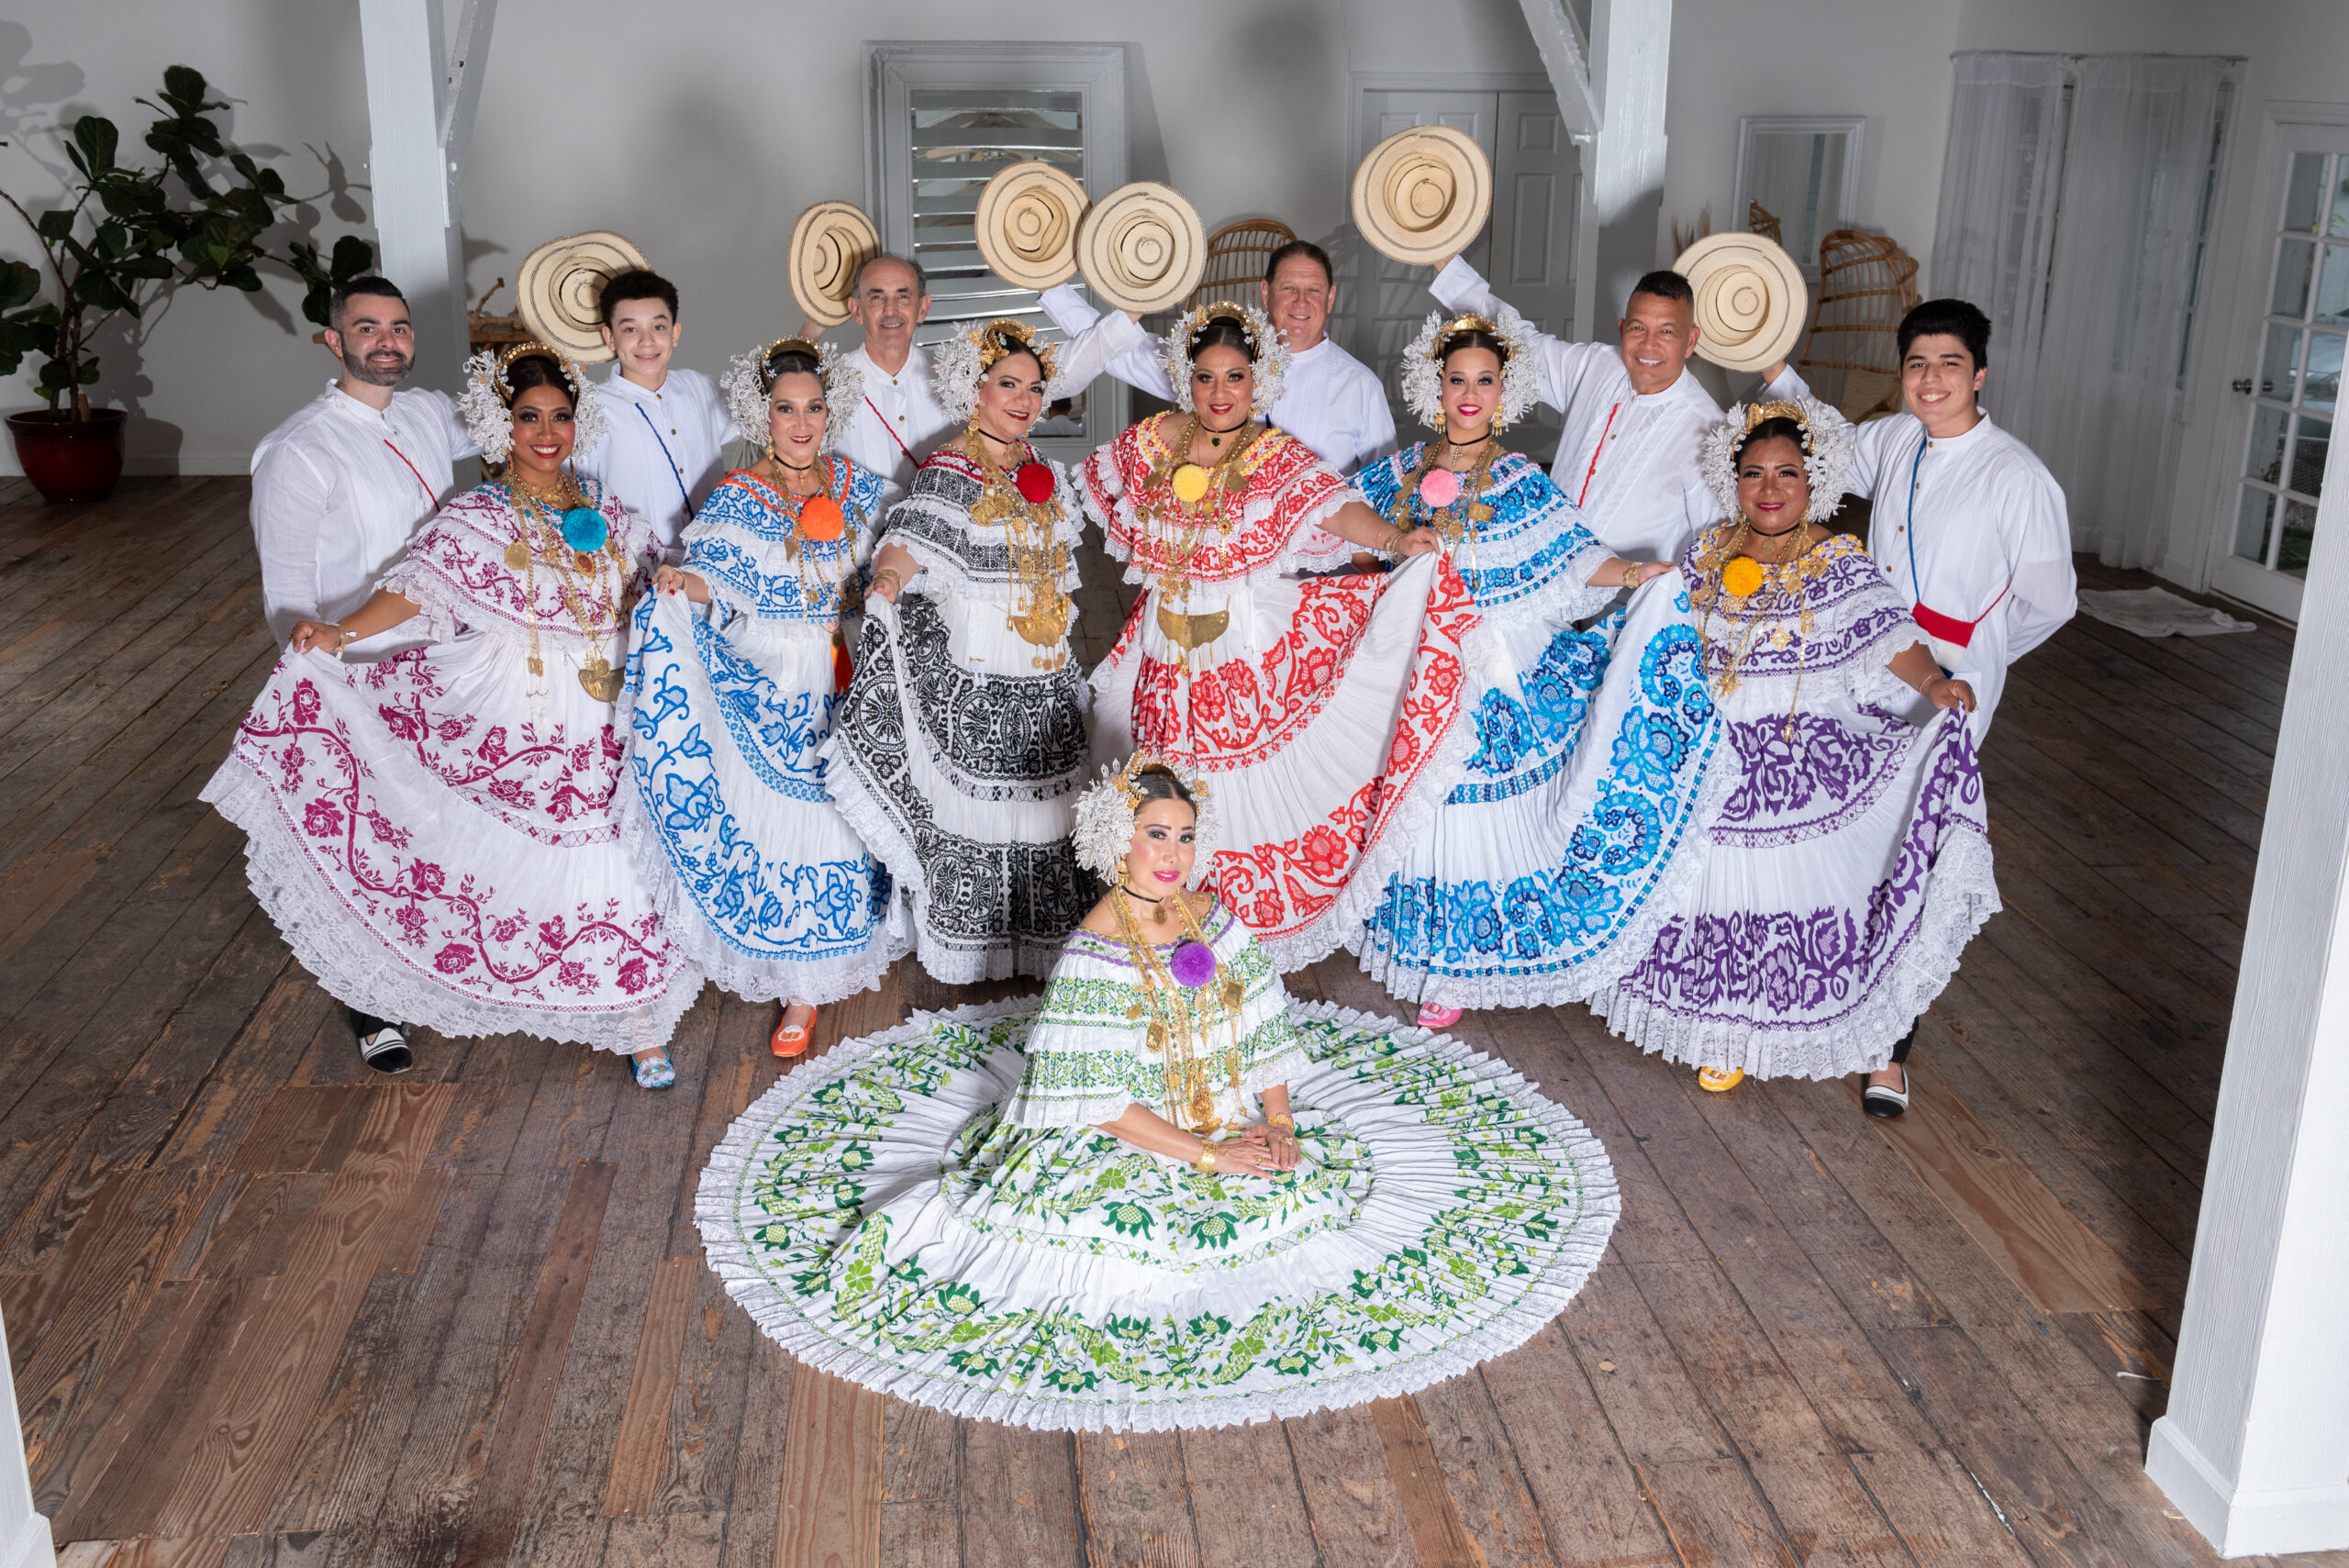 Seven women and six men pose for a photo. The women wear elaborate embroidered dresses in different colors with beaded headpieces and gold chains. The men stand behind the women and wear white shirts and hold up a straw hat in one hand. One woman sits in the front of the group with her skirt spread in a circle around her.